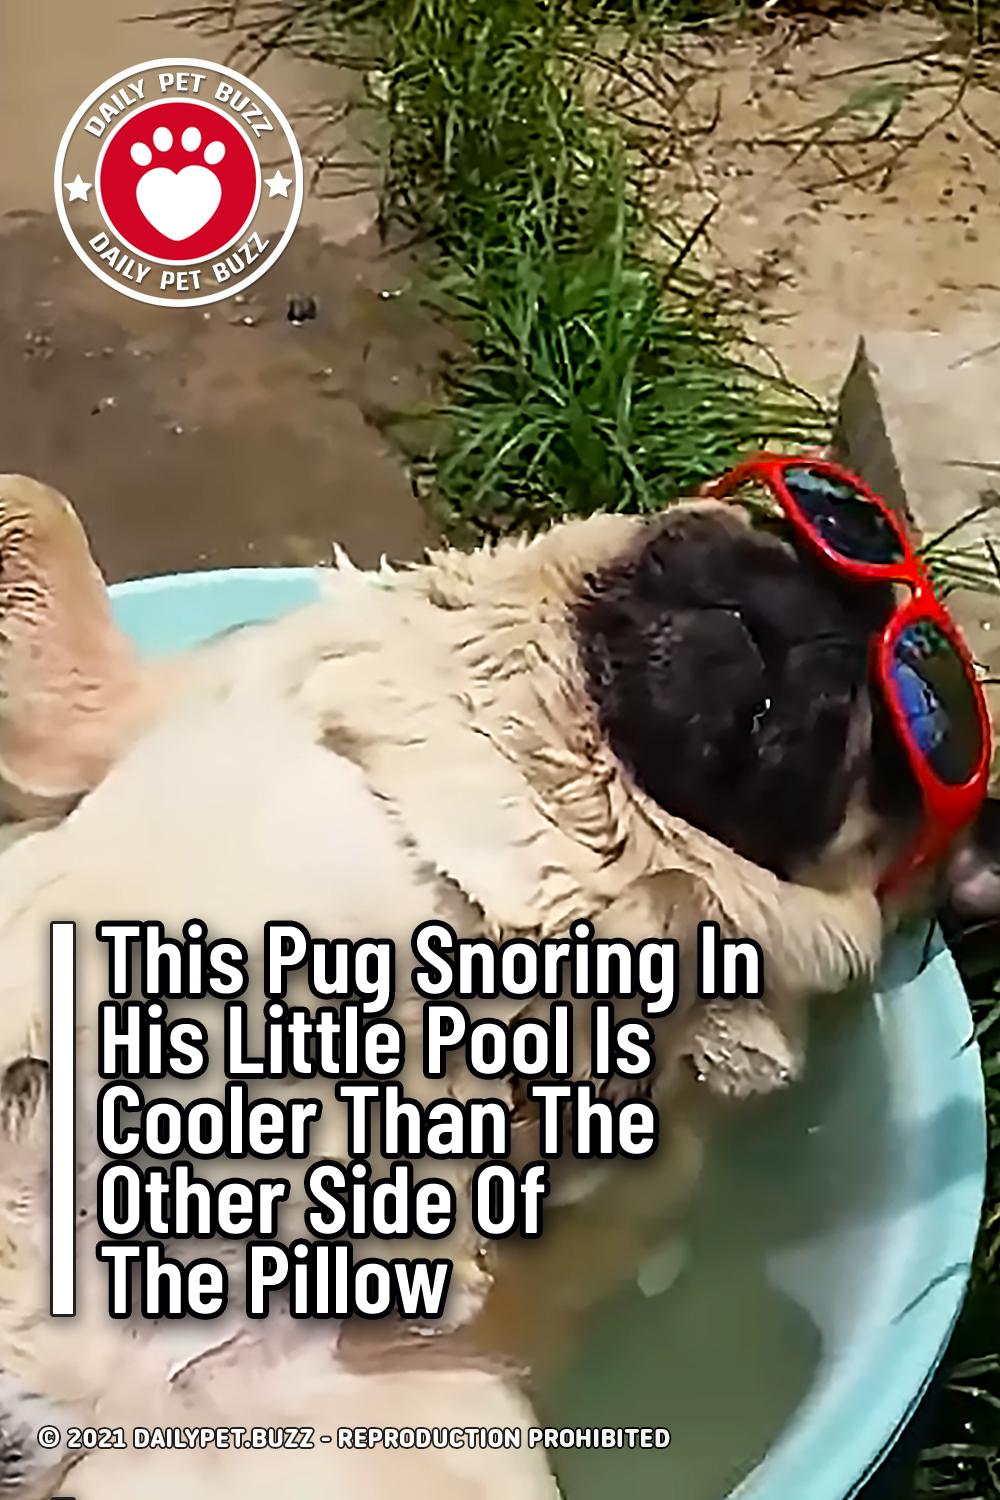 This Pug Snoring In His Little Pool Is Cooler Than The Other Side Of The Pillow